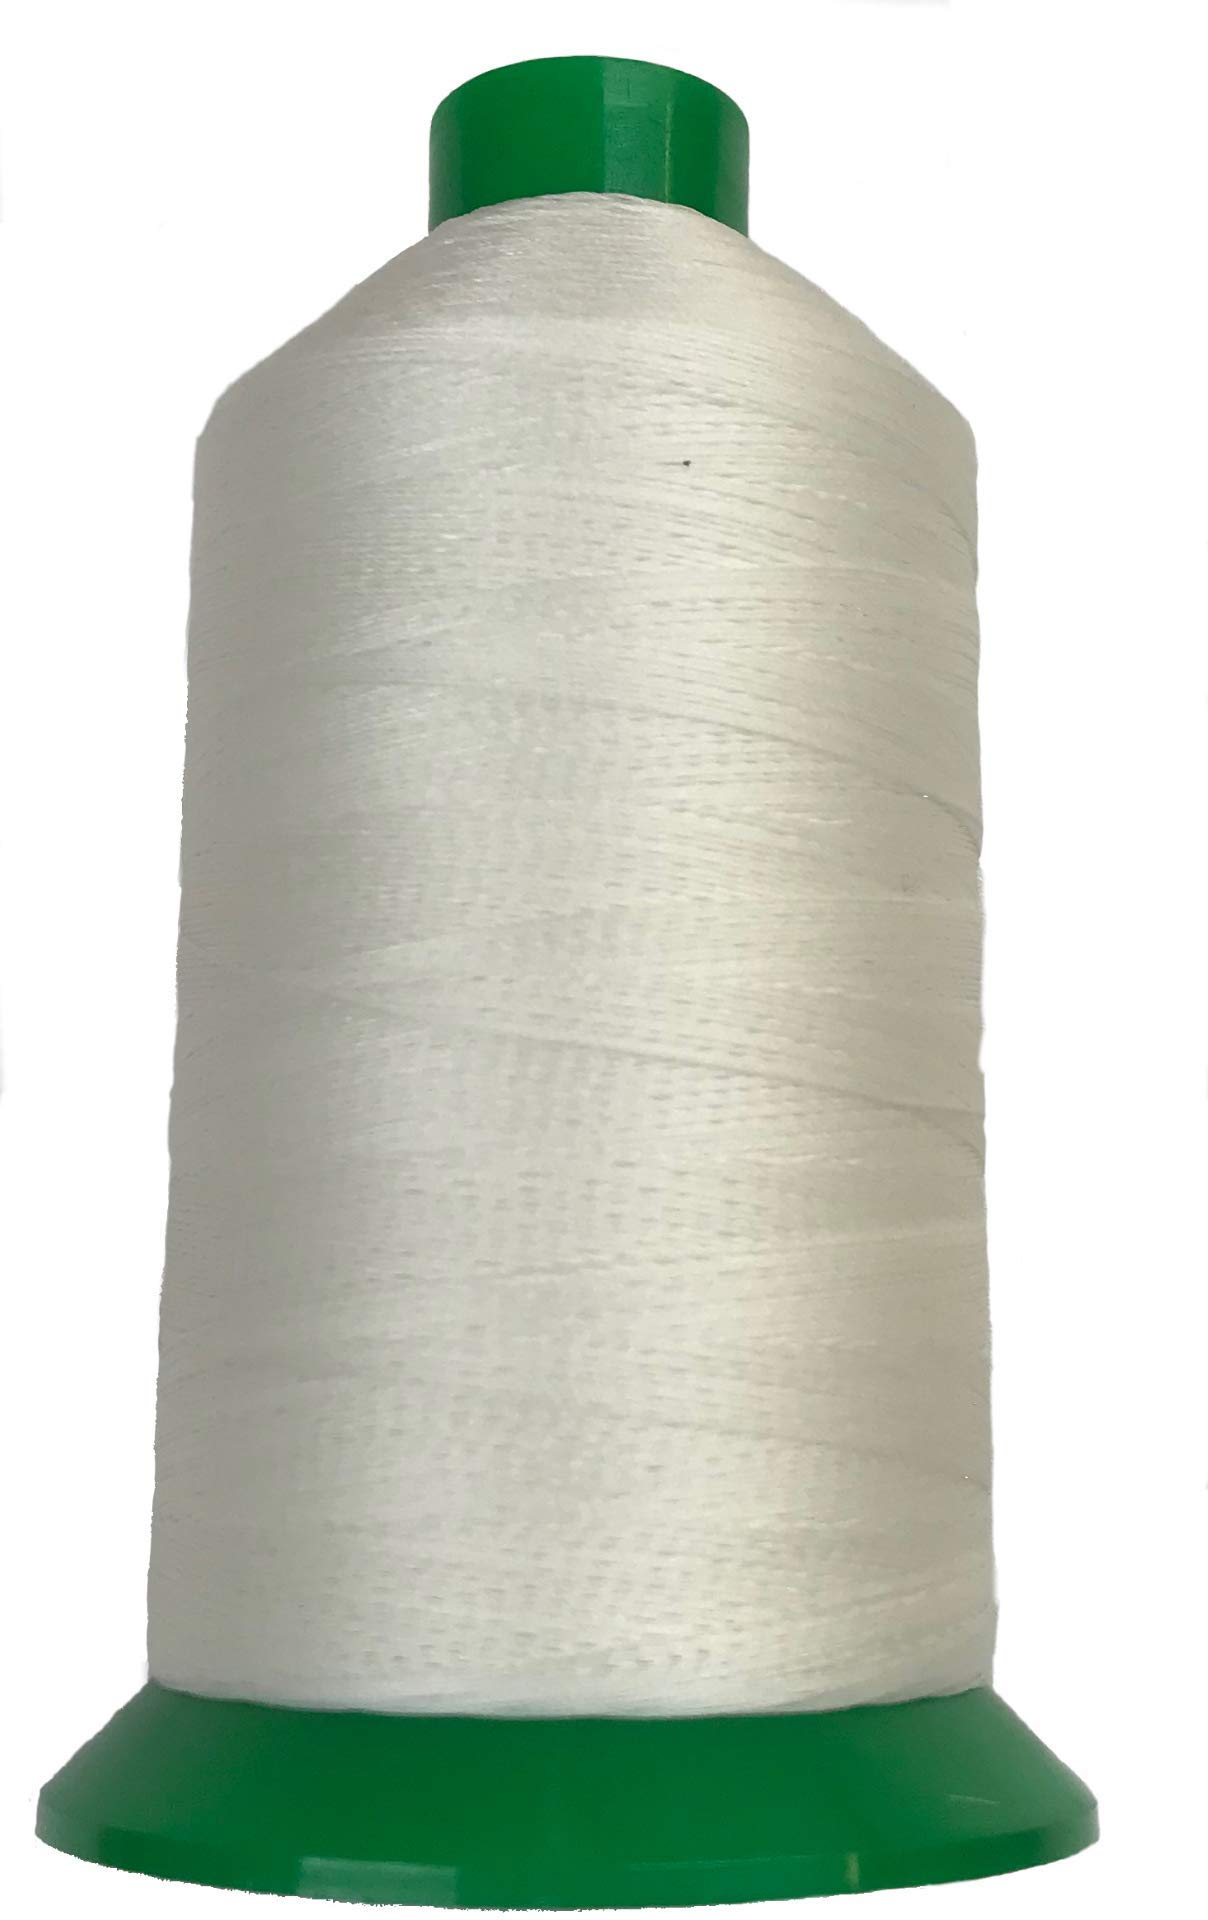 EZ-Xtend Serabond Bonded 92 Polyester Thread - UV Resistant and Heavy Duty  Thread Sewing - Extra Strong Upholstery Thread - Can Be Used On Home Sewing  Machines (White 8 oz Spool)